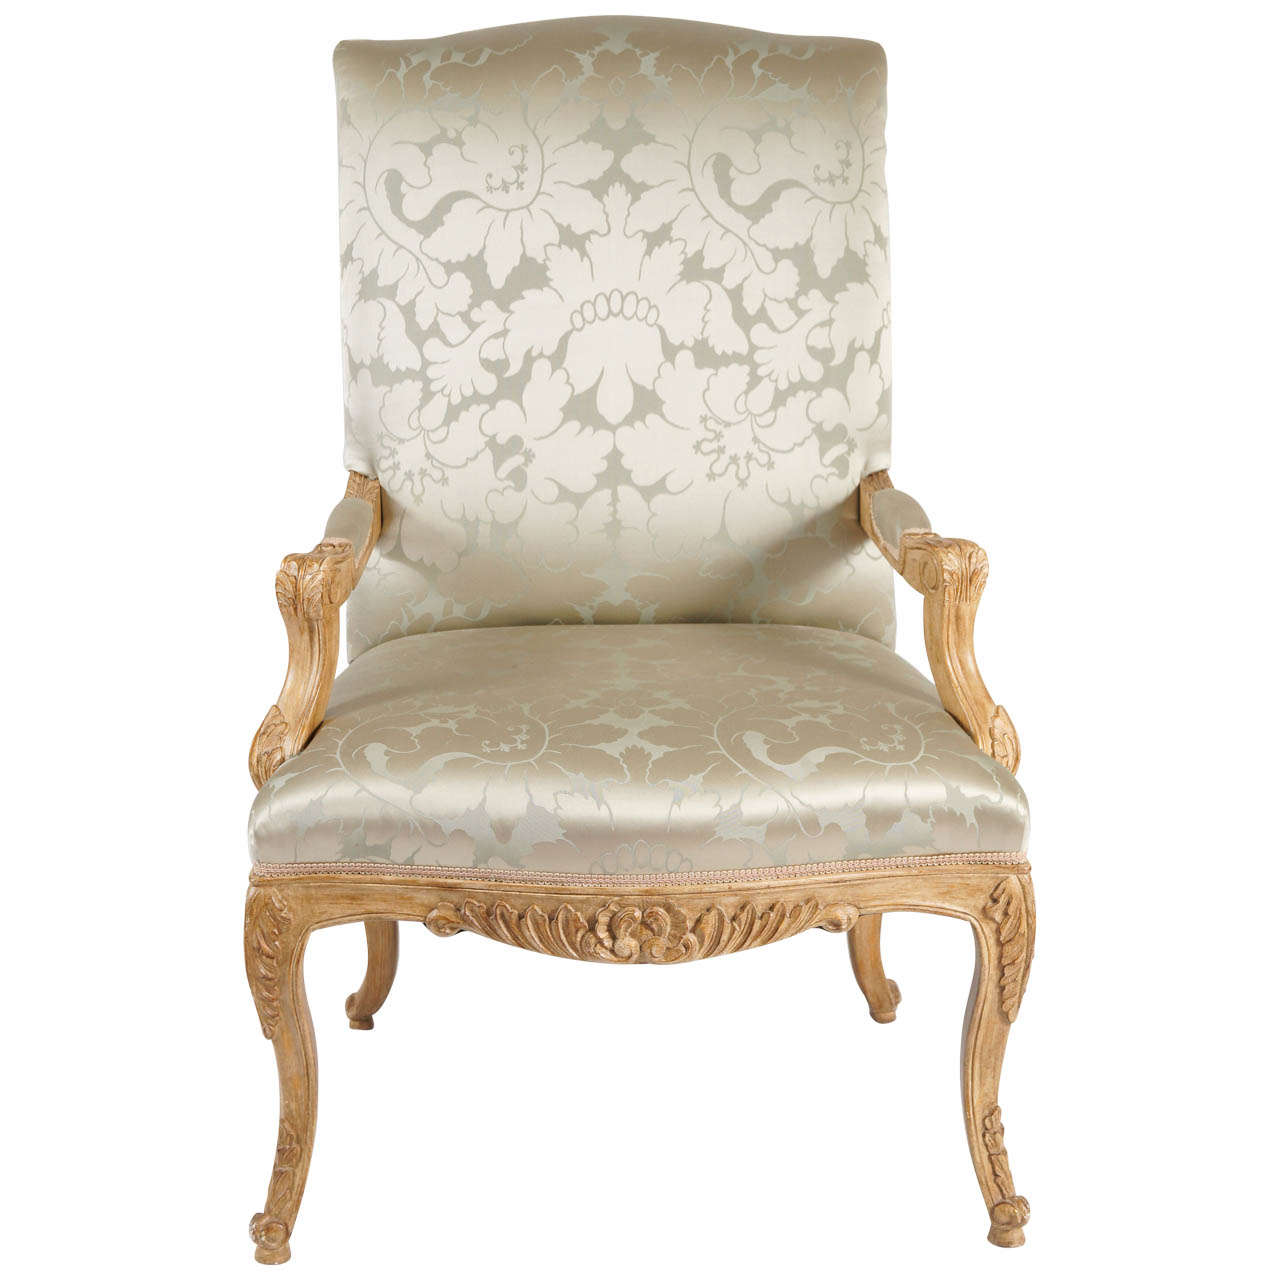 Louis XIV Style Chair, Silk Damask Upholstery at 1stdibs